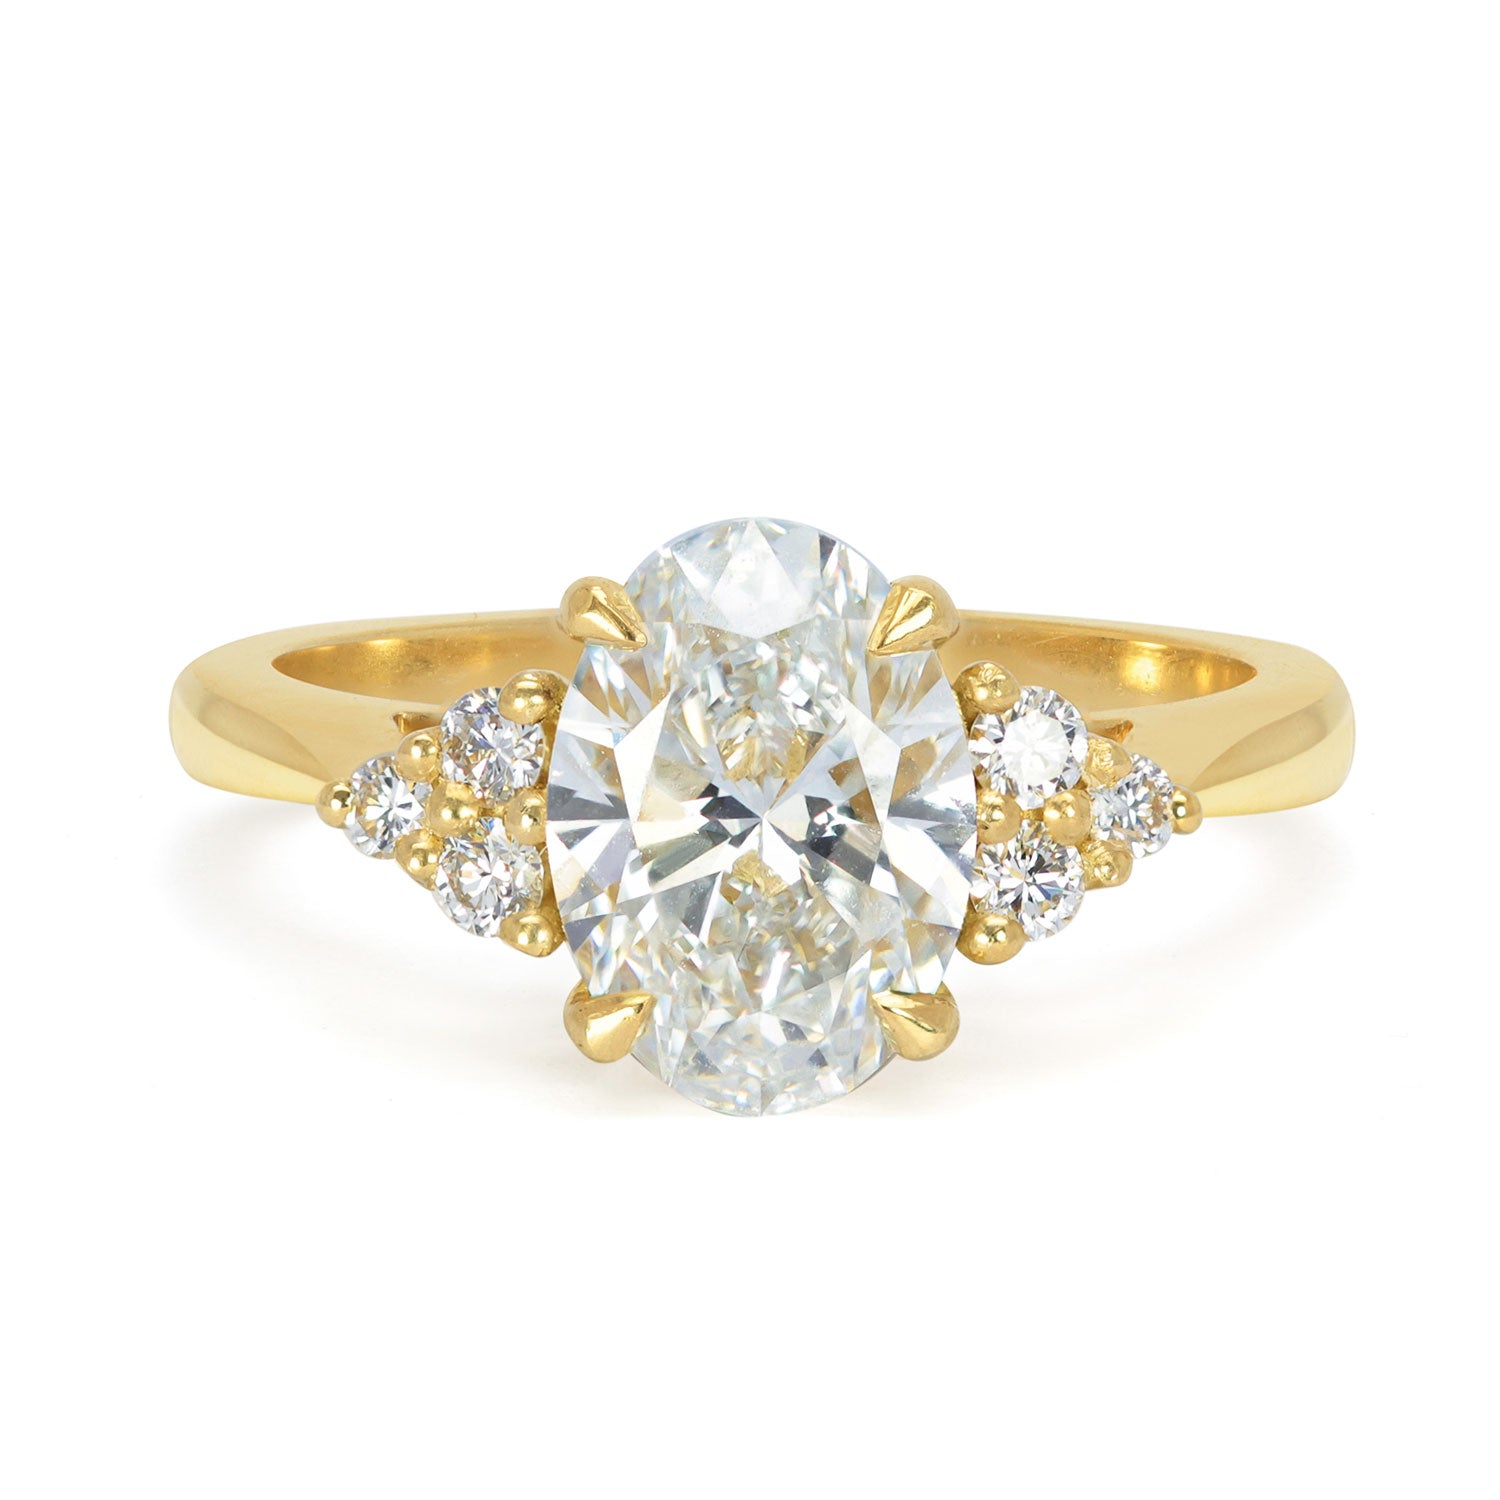 Bespoke George Ethical Diamond Cluster Engagement Ring